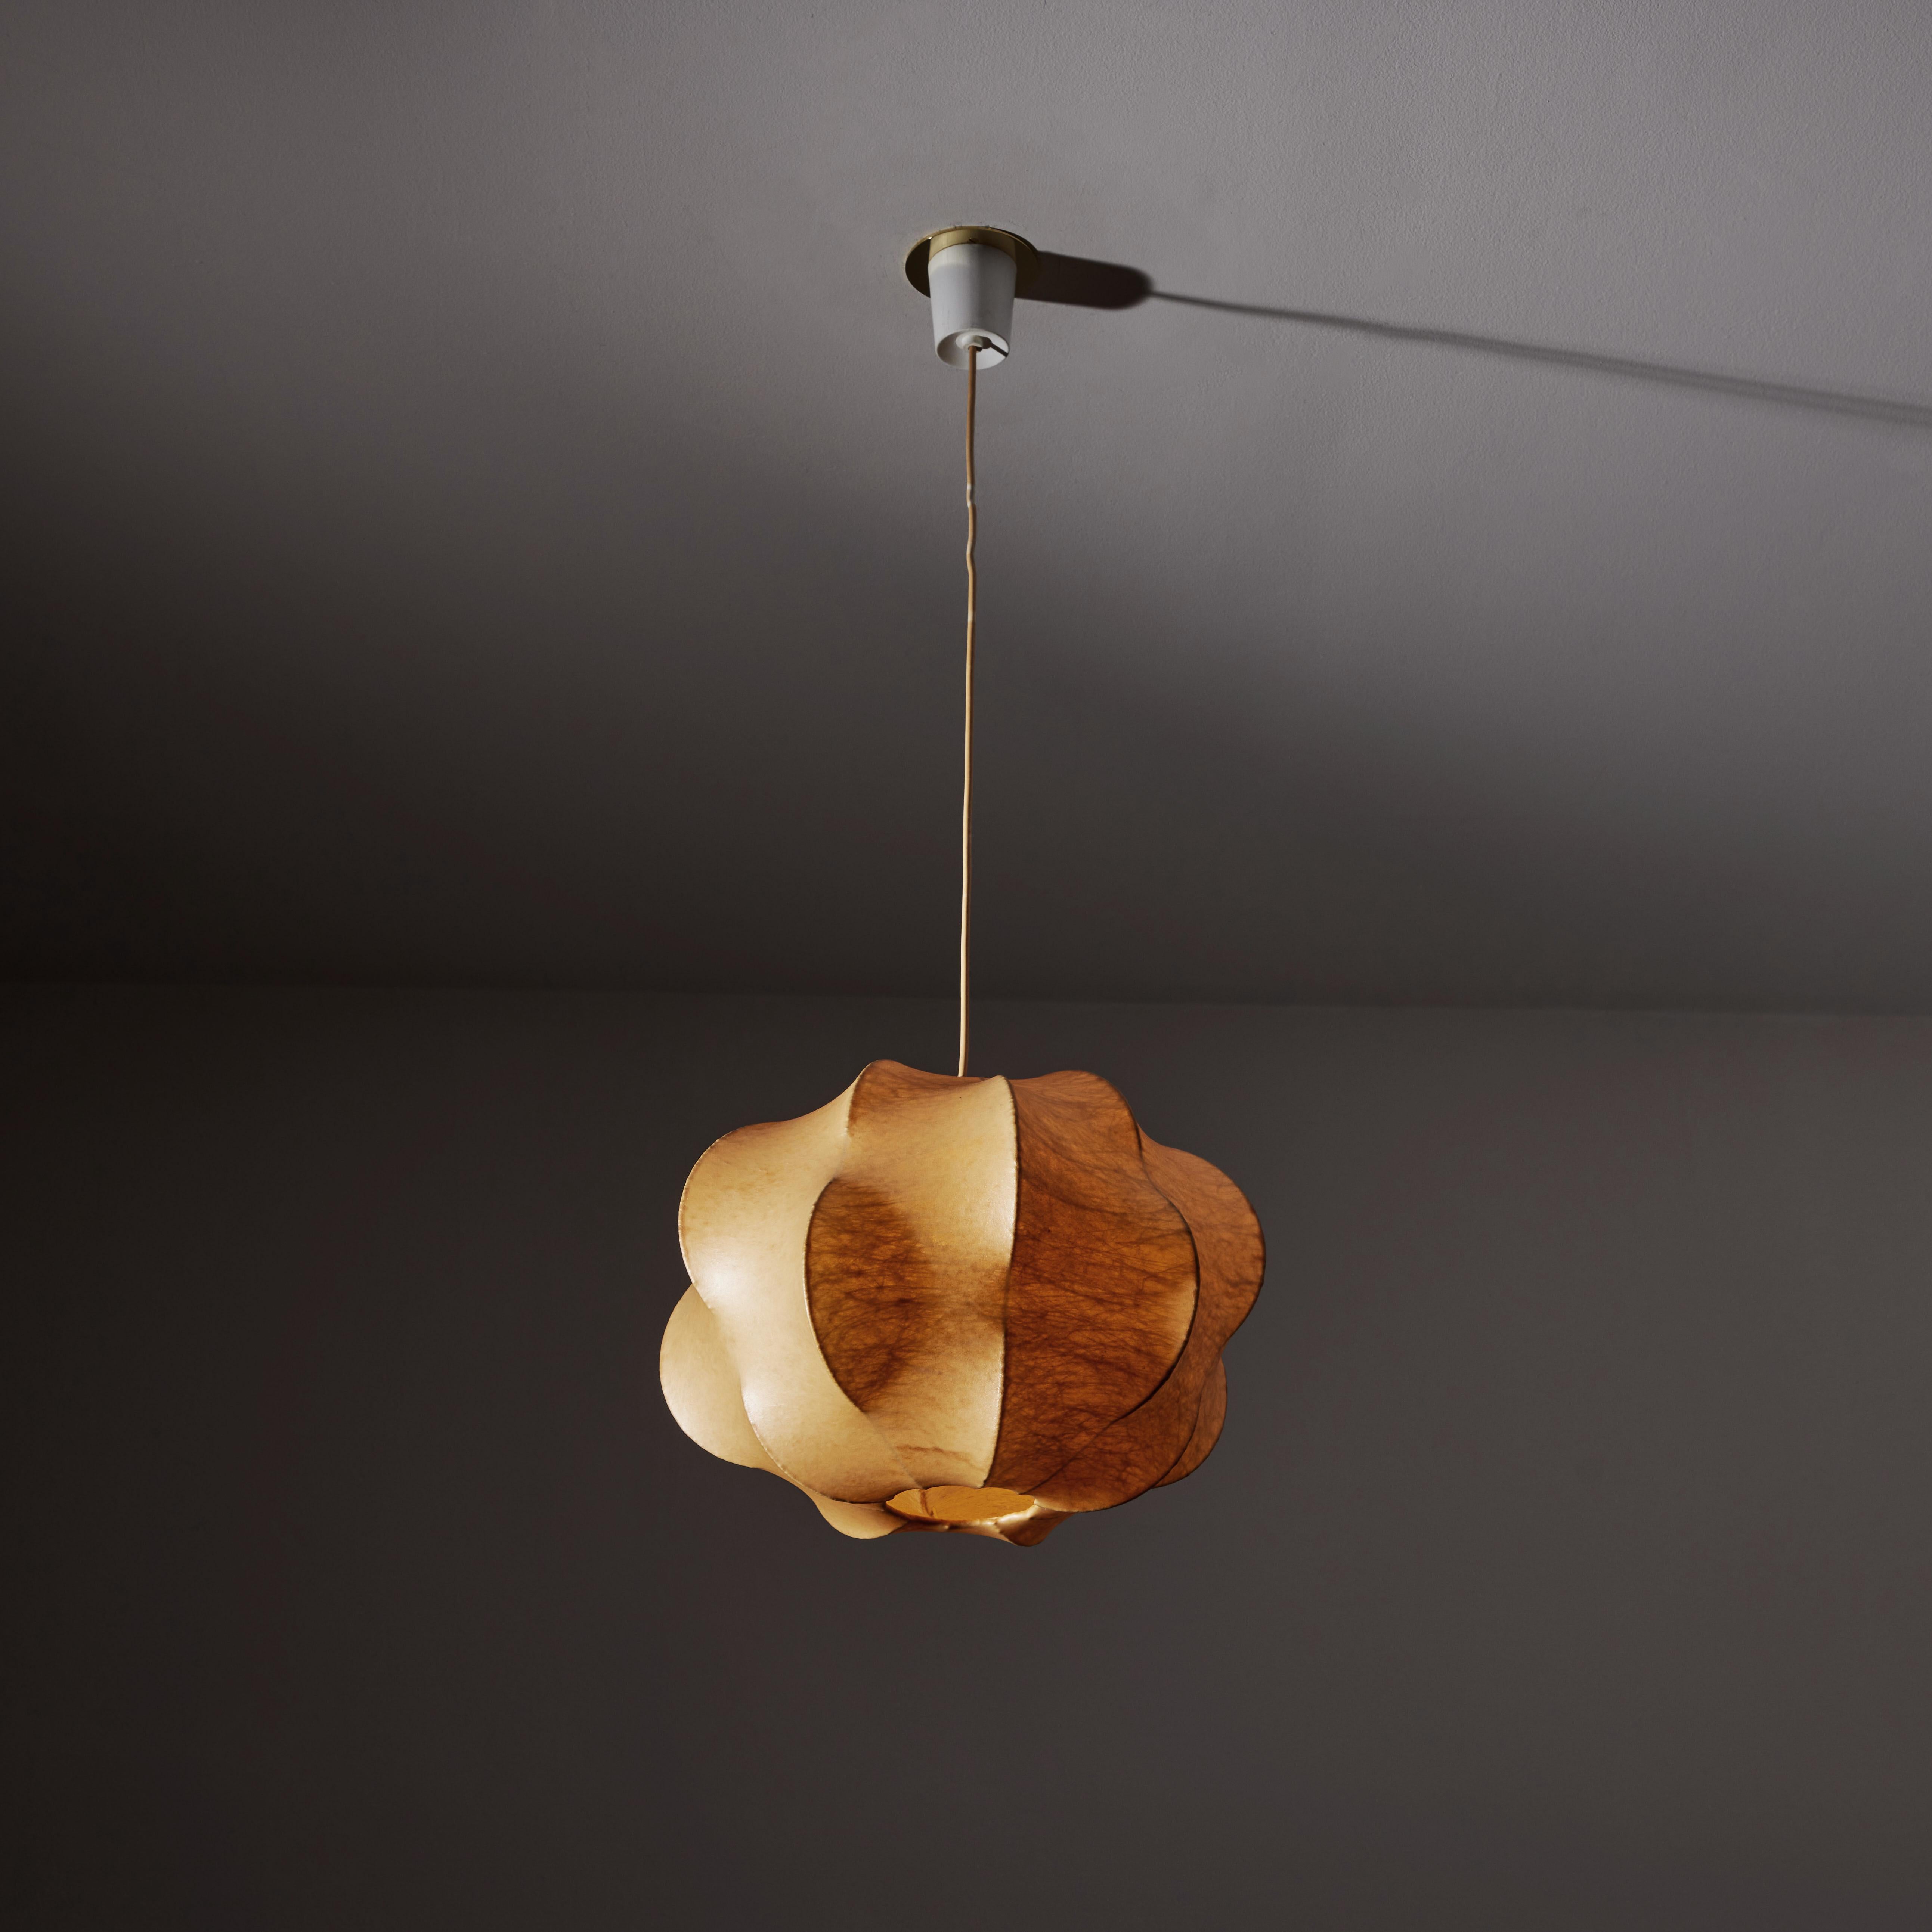 Enameled Nuvola Suspension Light by Tobia Scarpa for Flos